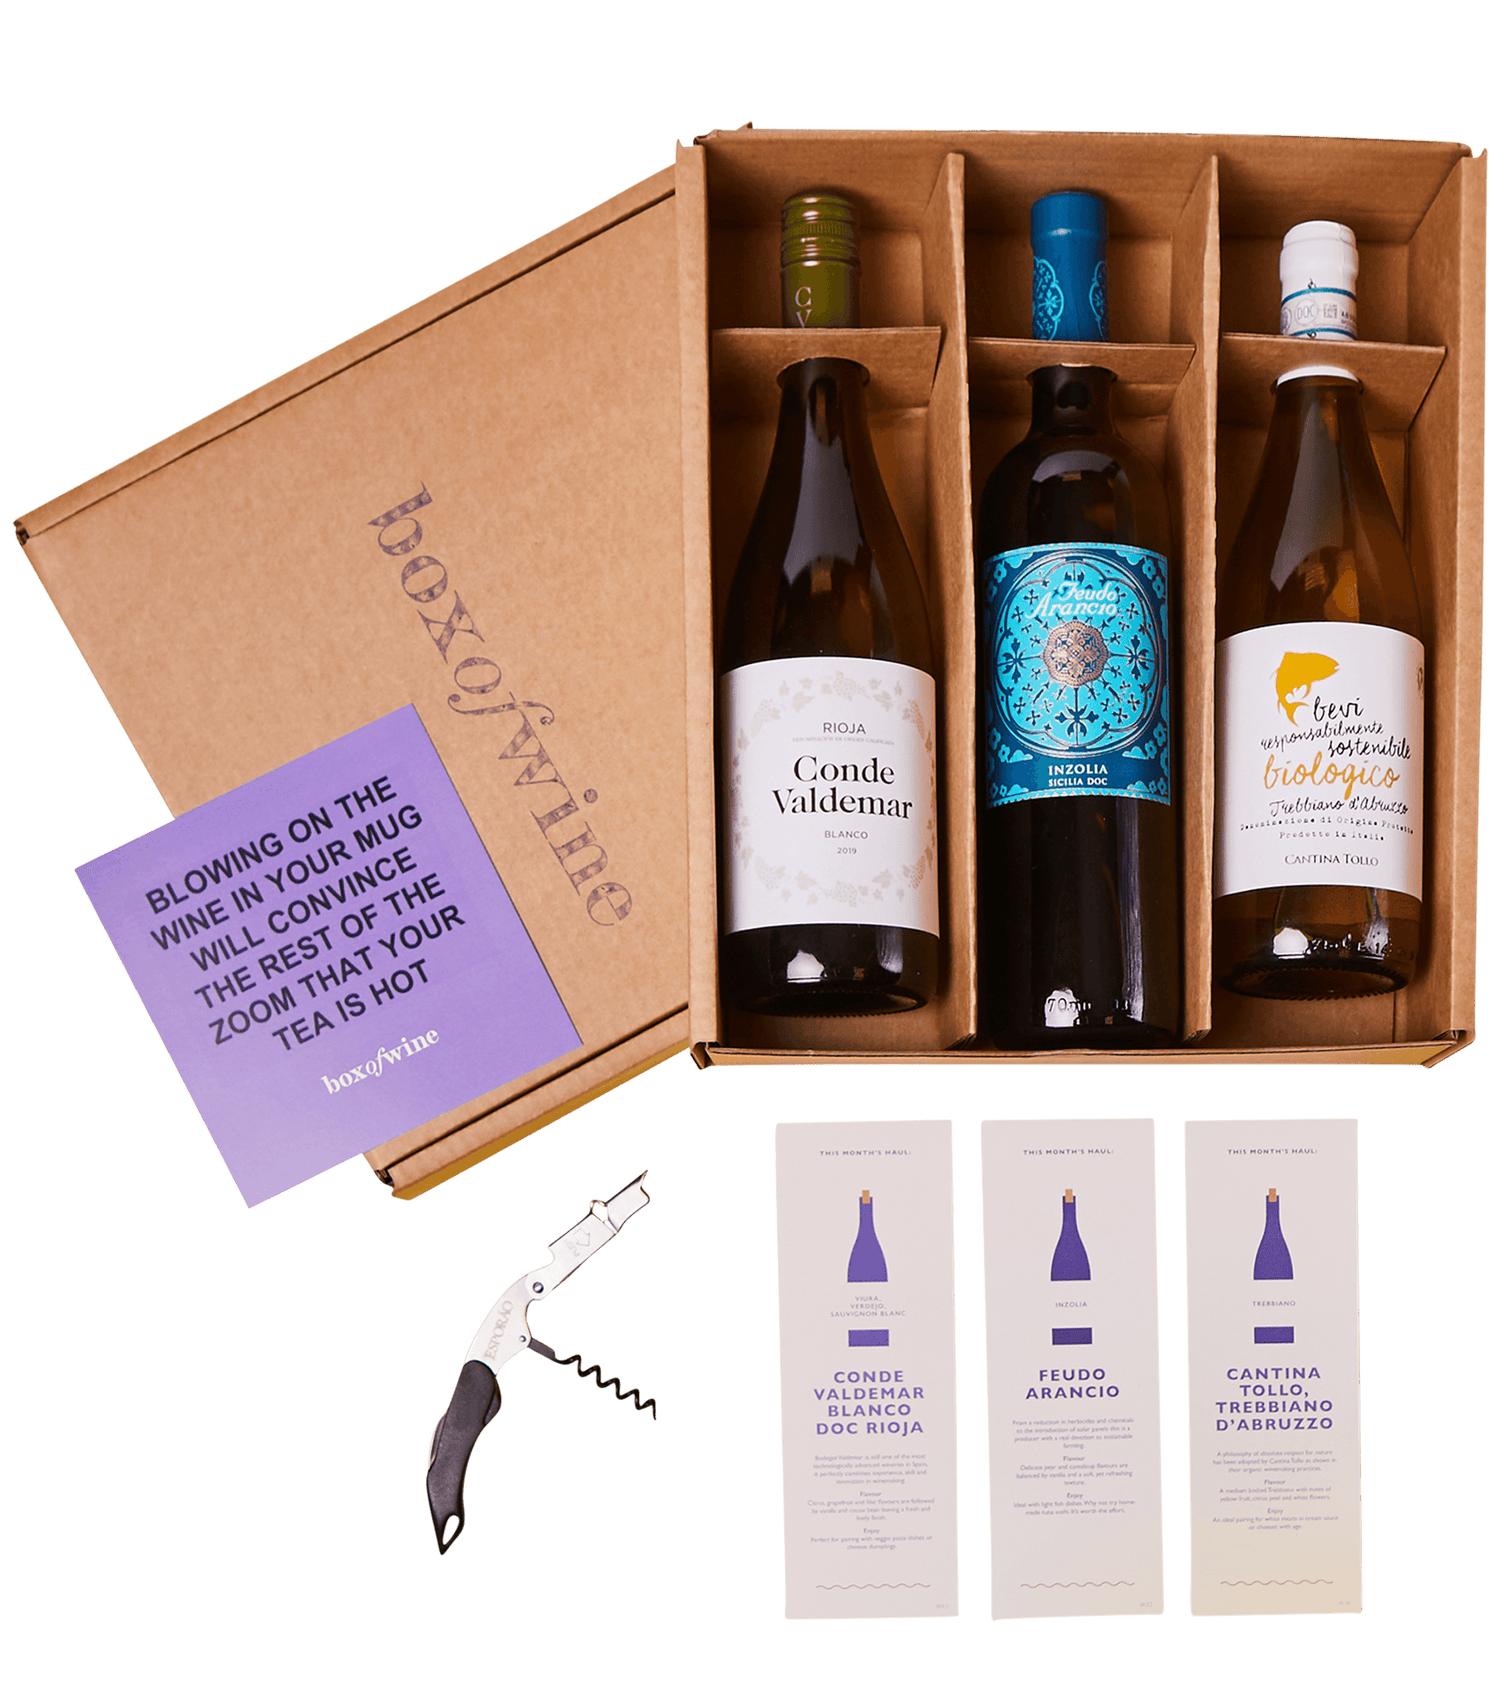 3 Bottles of Wine Gift Box from box of wine